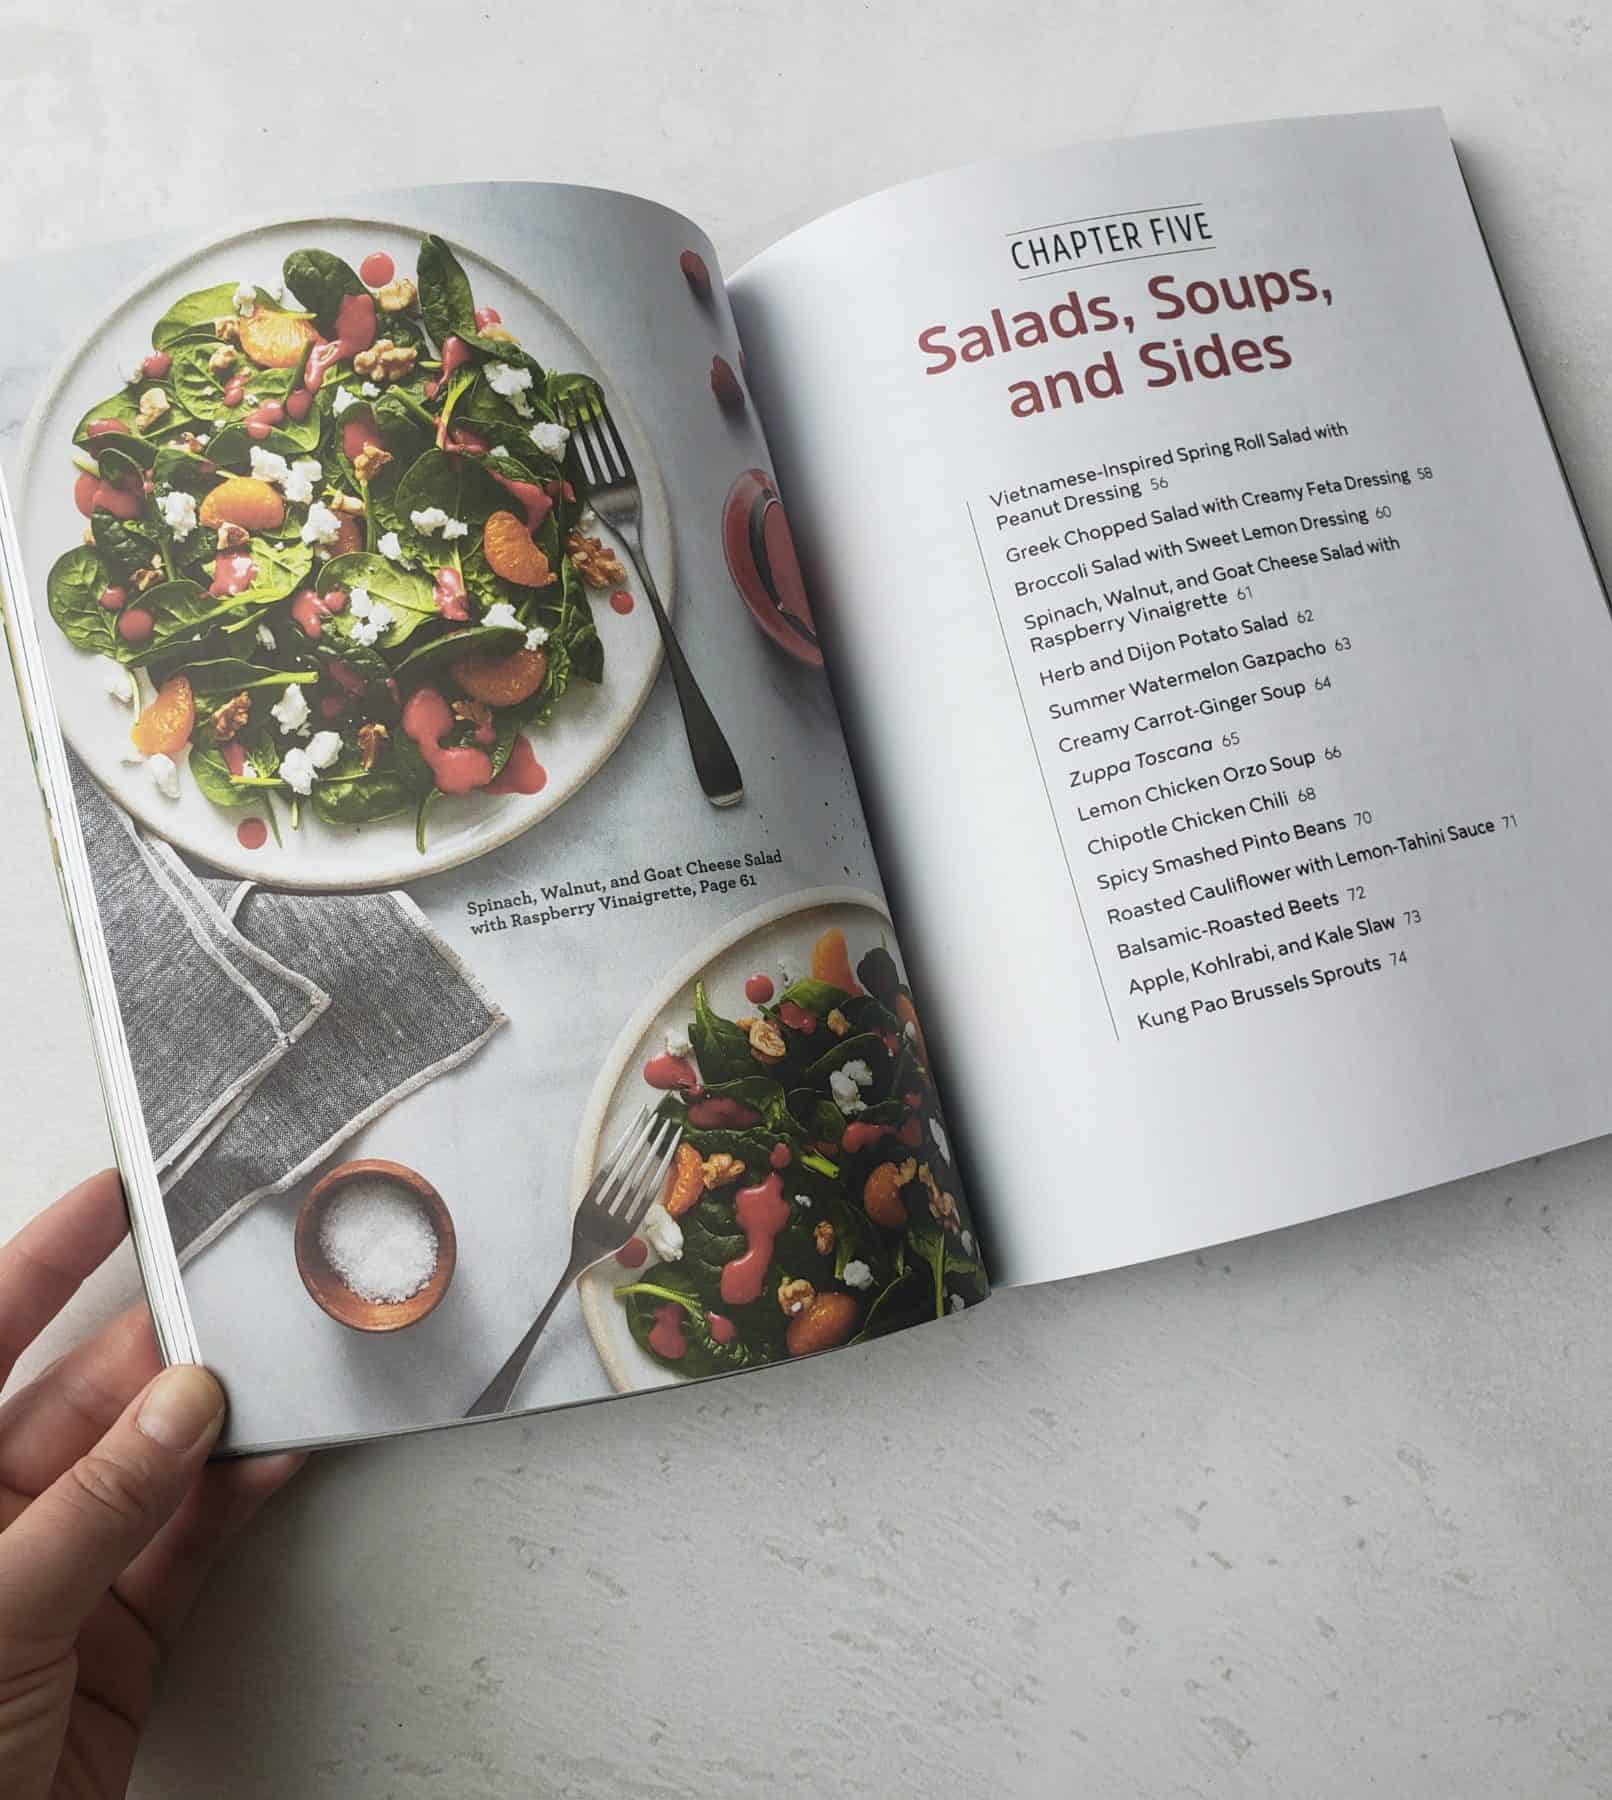 Salads page from cookbook